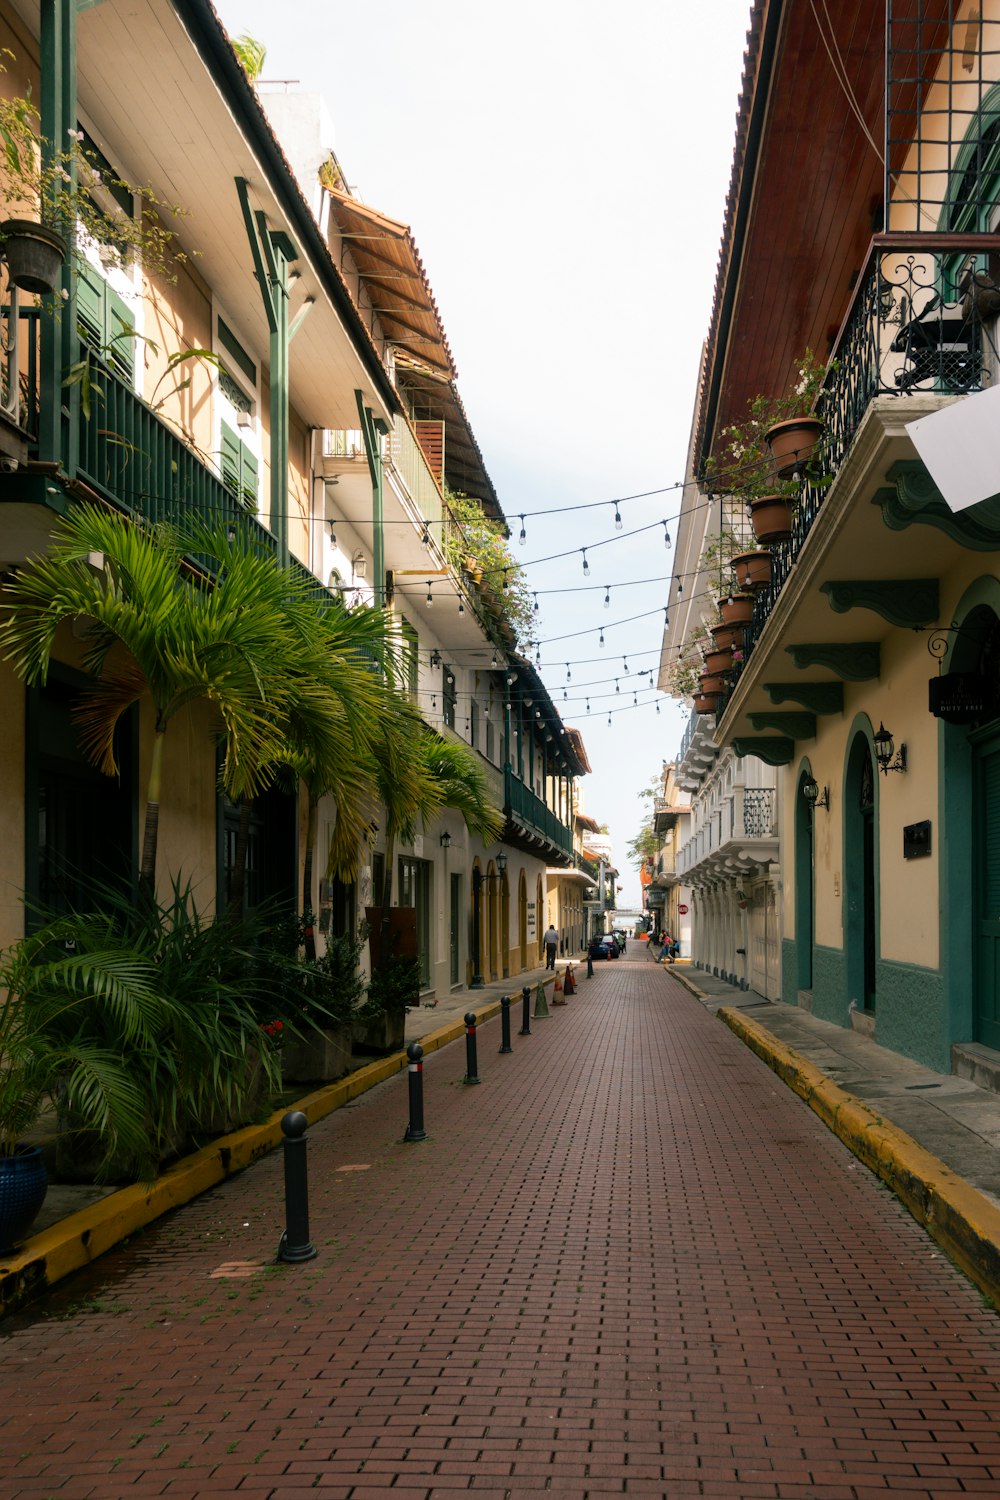 a brick street lined with buildings and palm trees